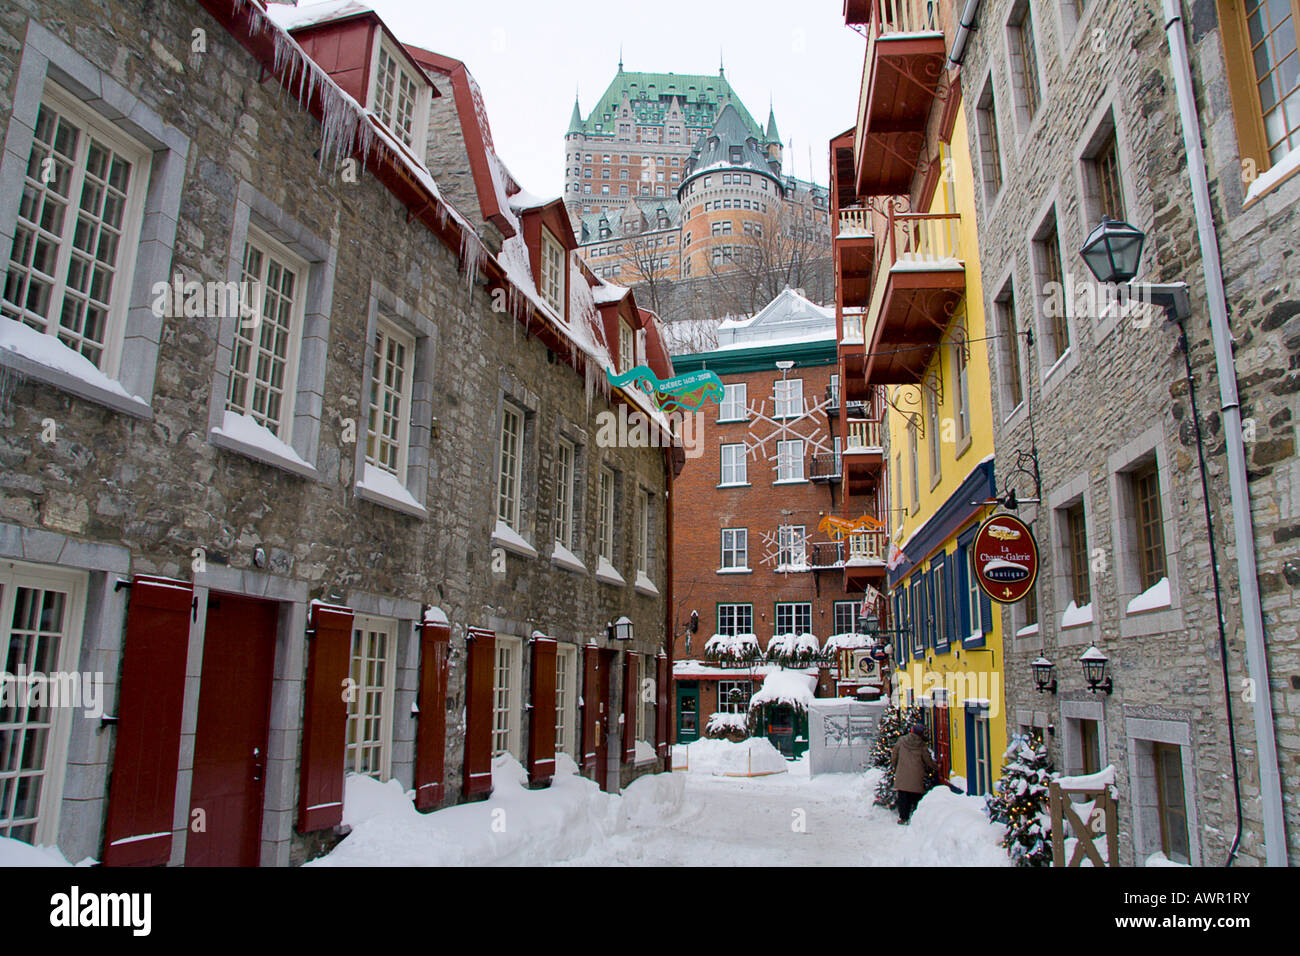 An alleyway with view of Château Frontenac, Québec City, Québec, Canada Stock Photo